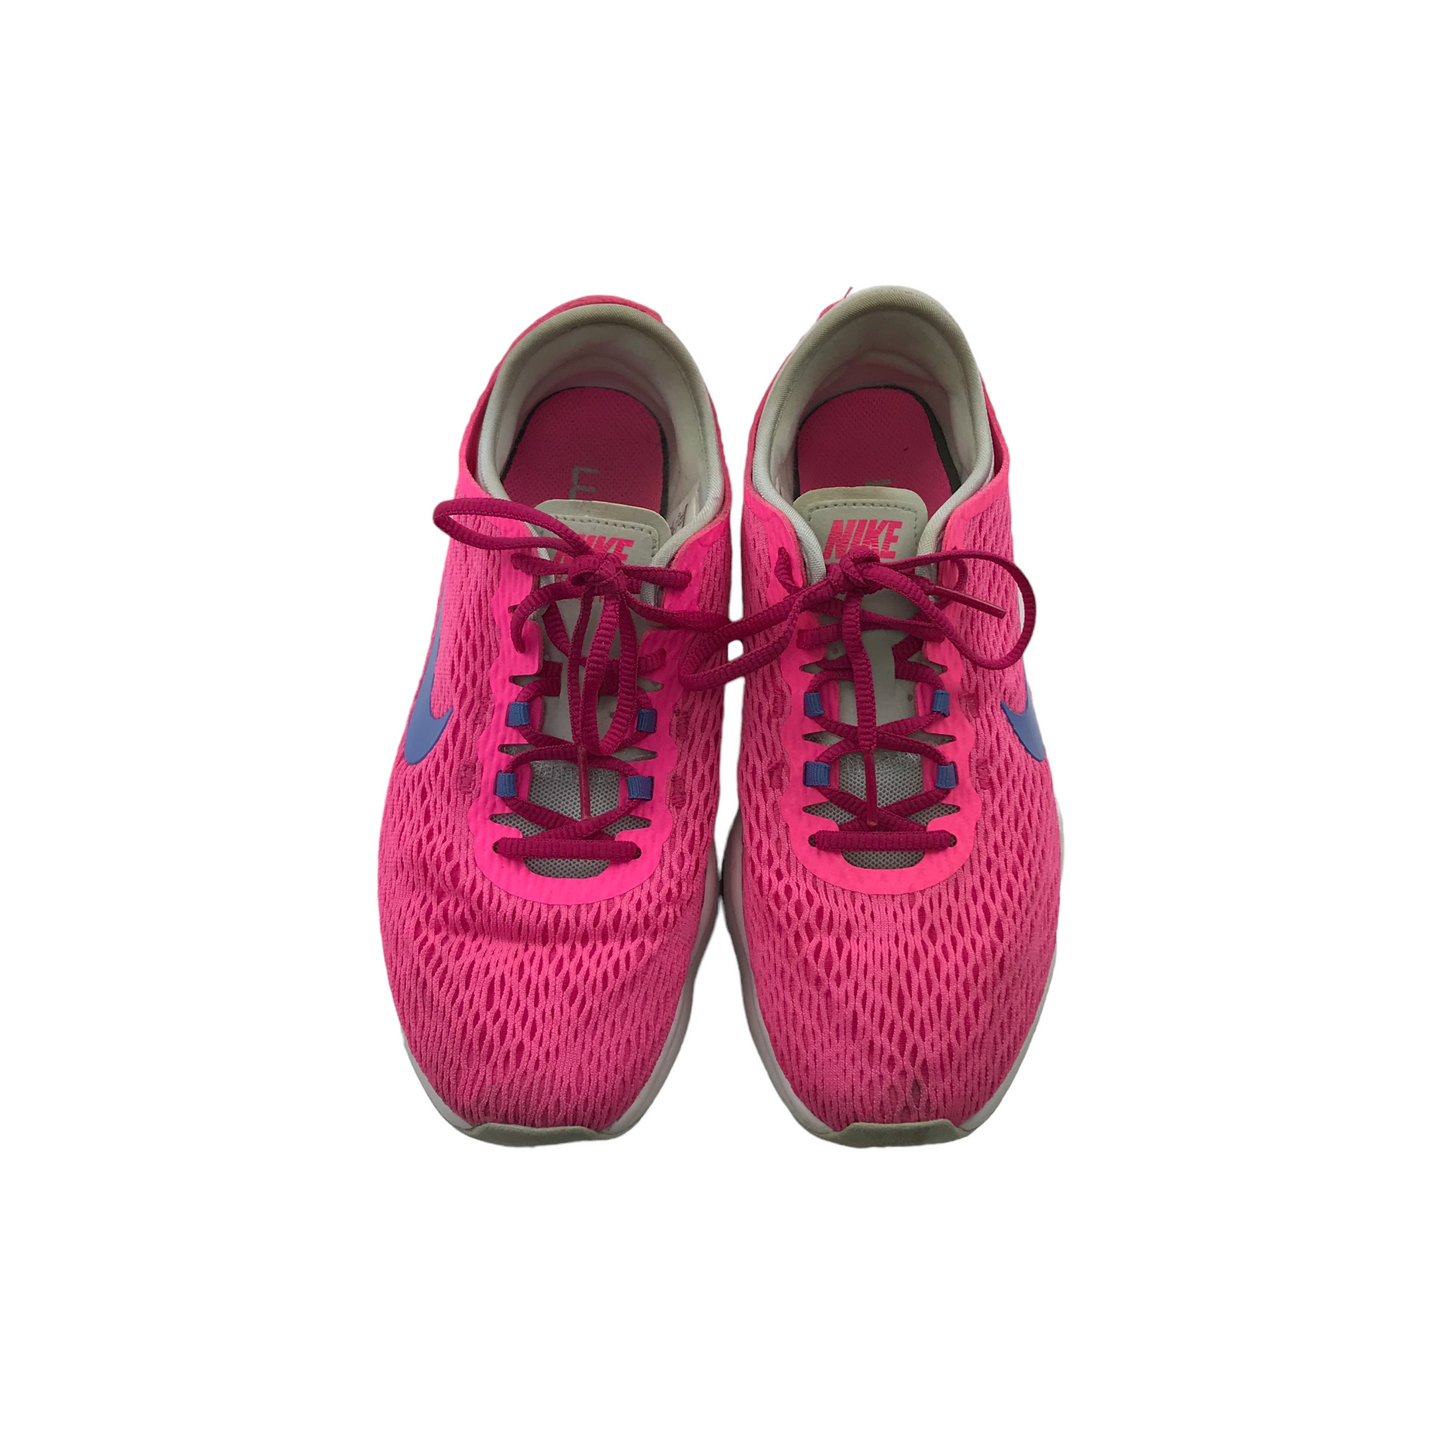 Nike Training Zoom Fit Pink Trainers Shoe Size 4